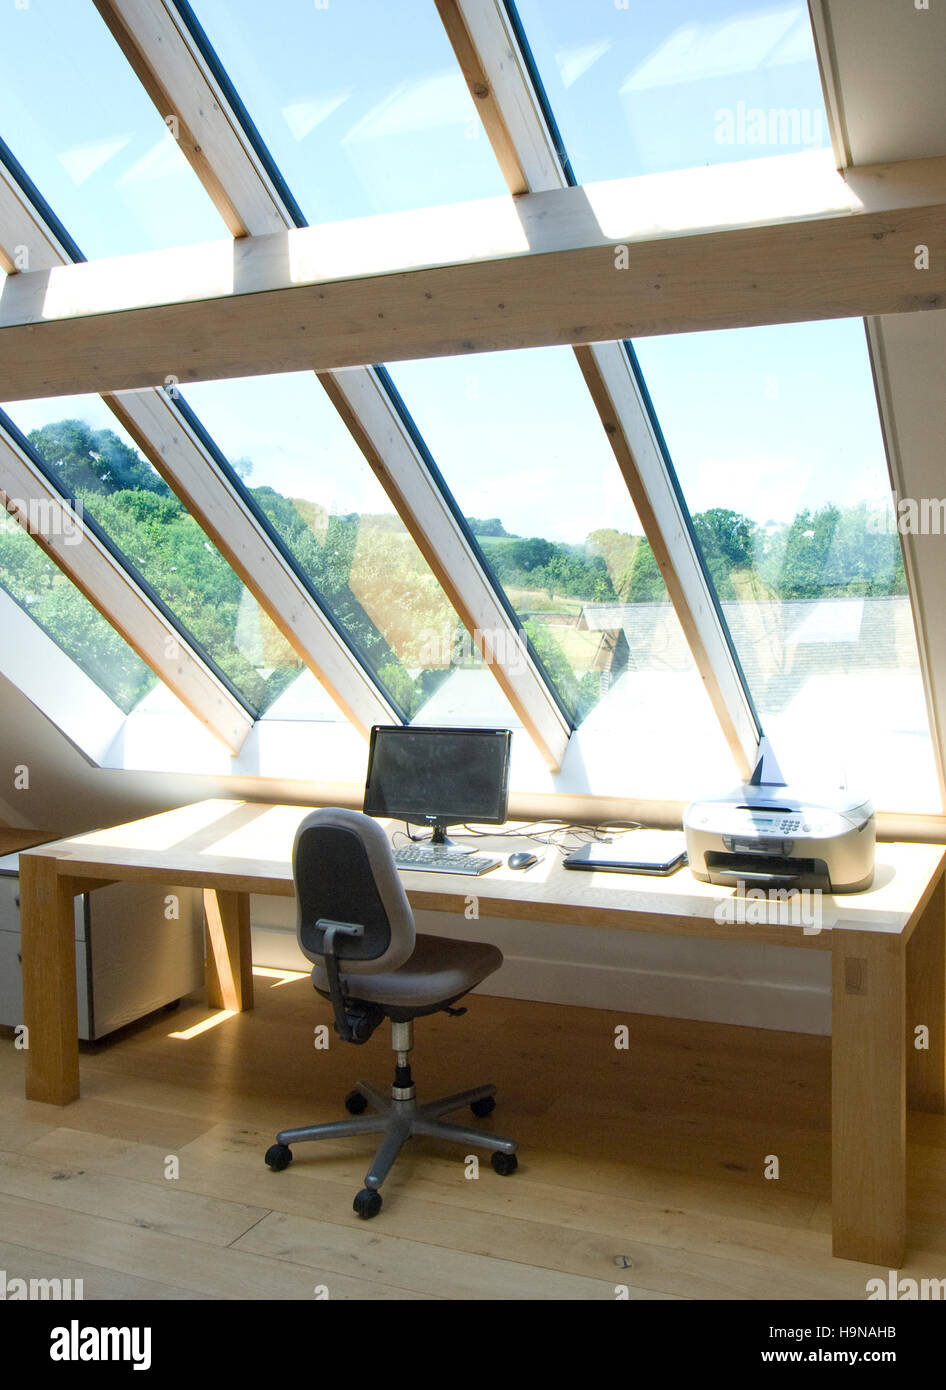 Home office, glass roof, daylight studio, workspace, desk top, study with view. Stock Photo